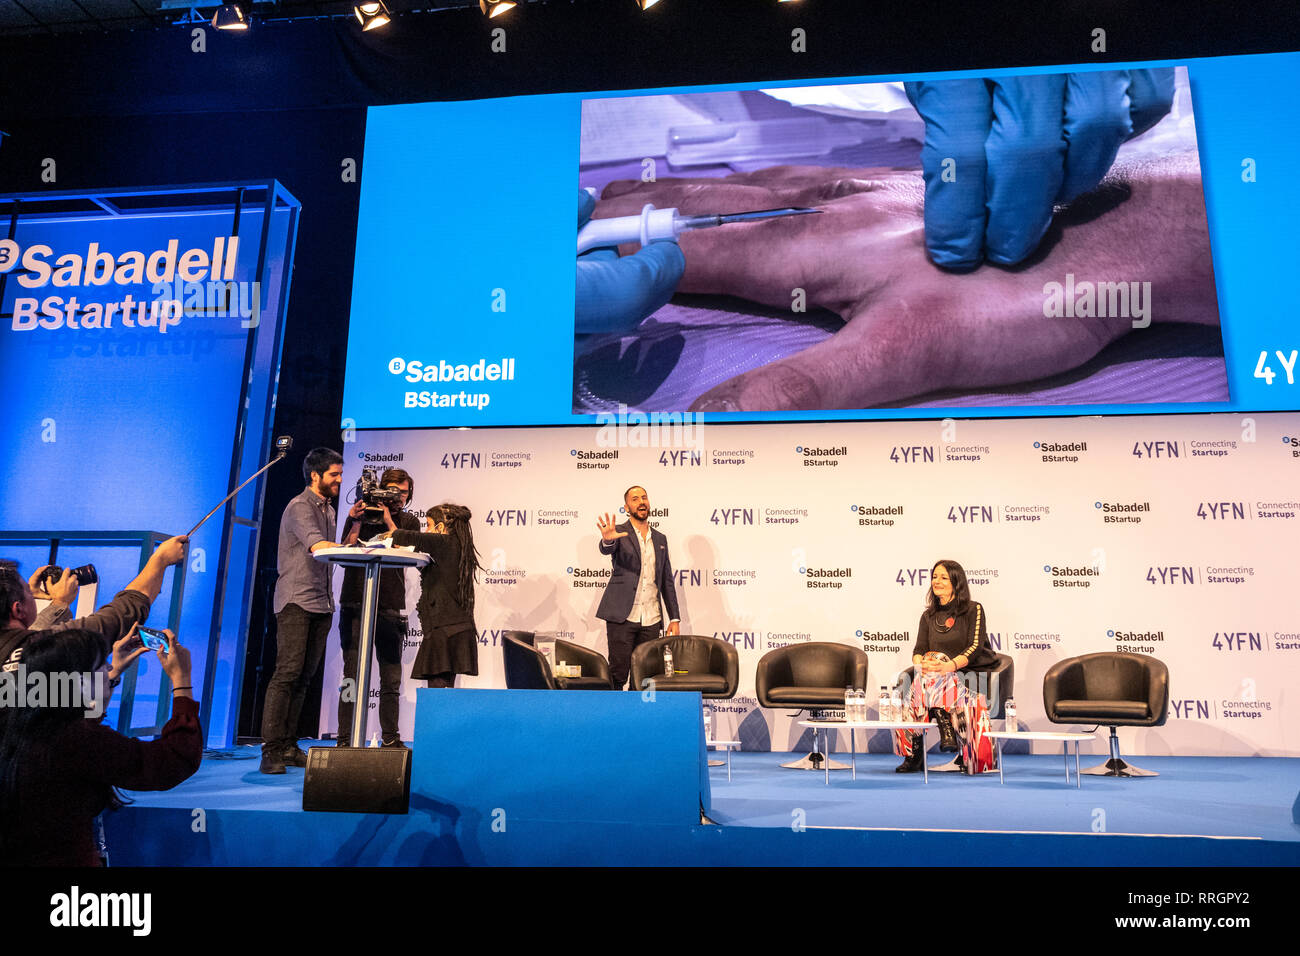 A volunteer Edgar Pons  is seen speaking during the Live Human Chip Implant Show.  Edgar Pons has been implanted with an RFID chip in his hand. Minutes later he has ordered a bank transfer (Banco Sabadell)  using his hand as an authorization signature. In parallel to the MWC, Barcelona celebrates 4YFN Connecting Startups a fair of small business initiatives connected by technology. Stock Photo